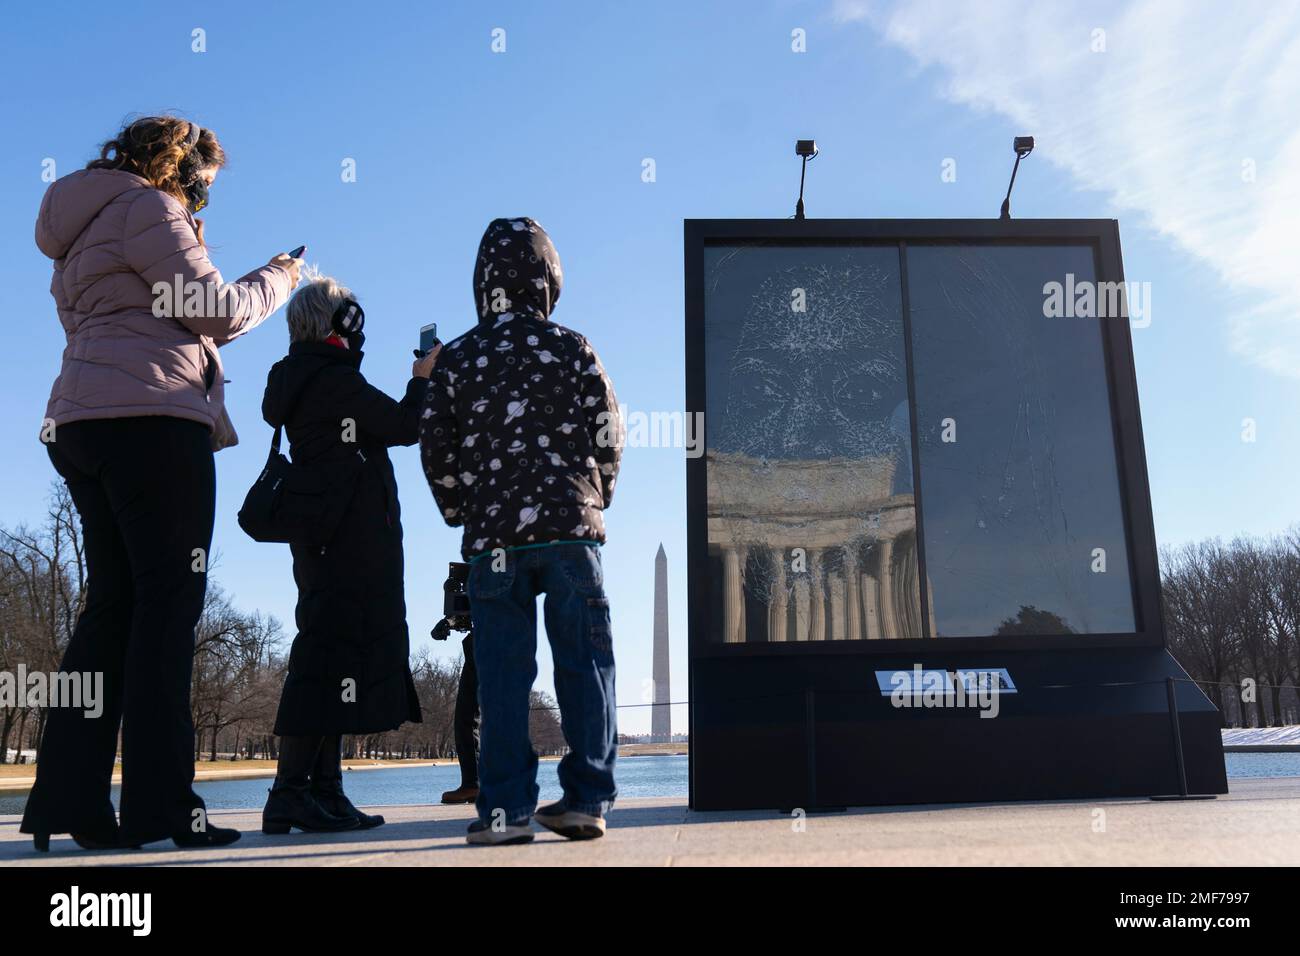 https://c8.alamy.com/comp/2MF7997/people-photograph-the-installation-vice-president-kamala-harris-glass-ceiling-breaker-at-the-lincoln-memorial-in-washington-wednesday-feb-4-2021-vice-president-kamala-harris-barrier-breaking-career-has-been-memorialized-in-a-portrait-depicting-her-face-emerging-from-the-cracks-in-a-massive-sheet-of-glass-using-a-photo-of-harris-that-taken-by-photographer-celeste-sloman-artist-simon-berger-lightly-hammered-on-the-slab-of-laminated-glass-to-create-the-portrait-of-harris-the-washington-monument-is-seen-in-the-distance-and-the-lincoln-memorial-is-reflected-ap-photocarolyn-kaster-2MF7997.jpg